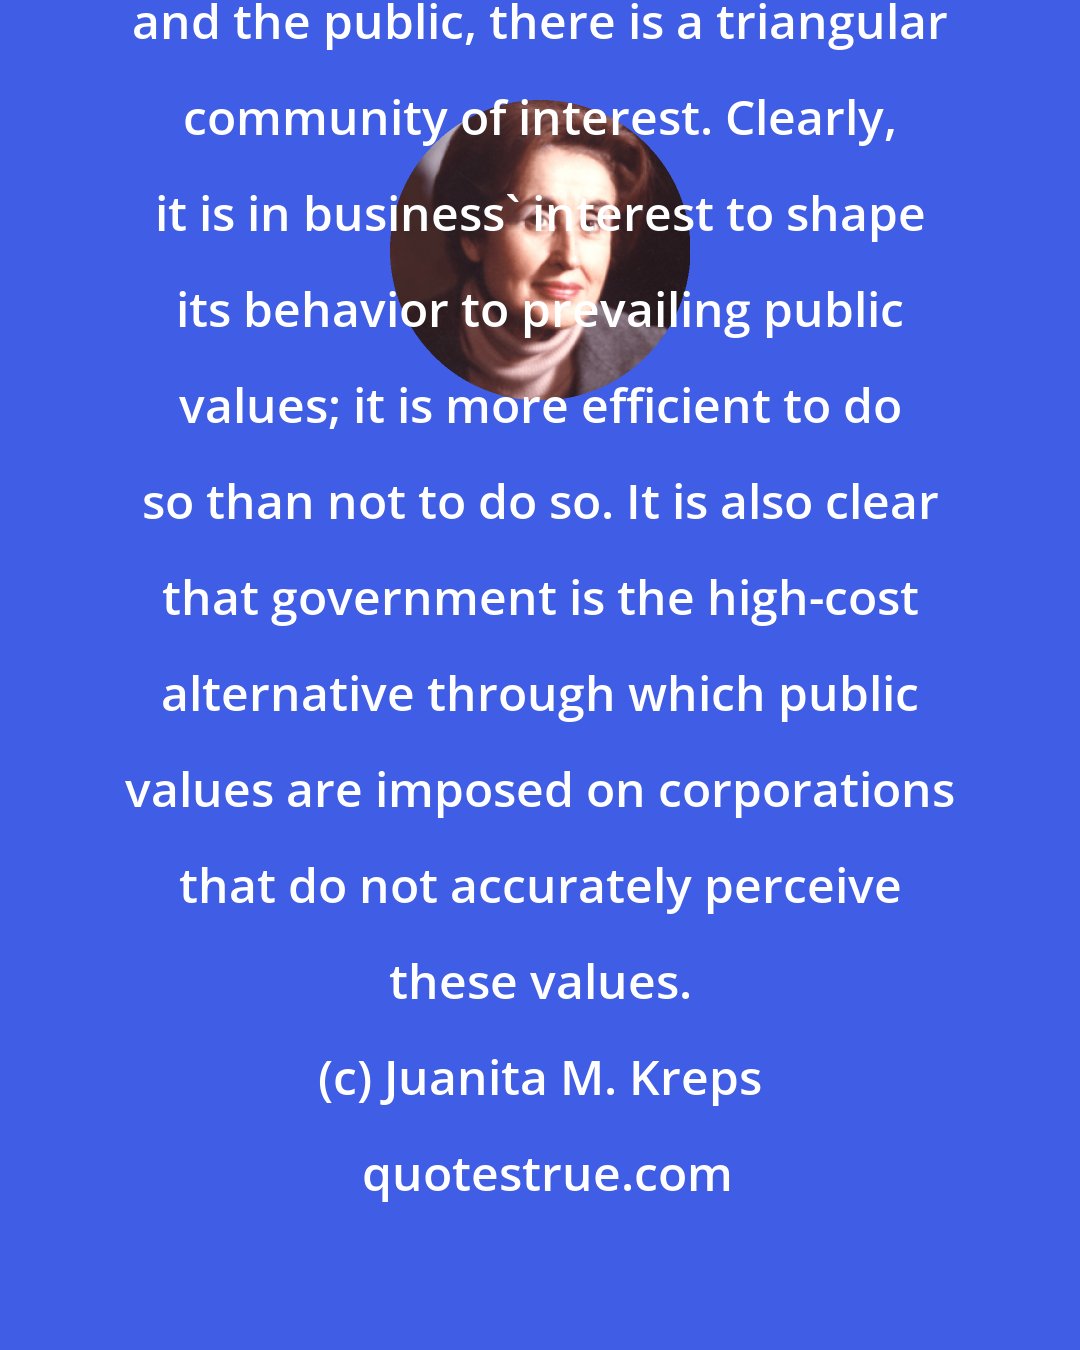 Juanita M. Kreps: ... between government, business, and the public, there is a triangular community of interest. Clearly, it is in business' interest to shape its behavior to prevailing public values; it is more efficient to do so than not to do so. It is also clear that government is the high-cost alternative through which public values are imposed on corporations that do not accurately perceive these values.